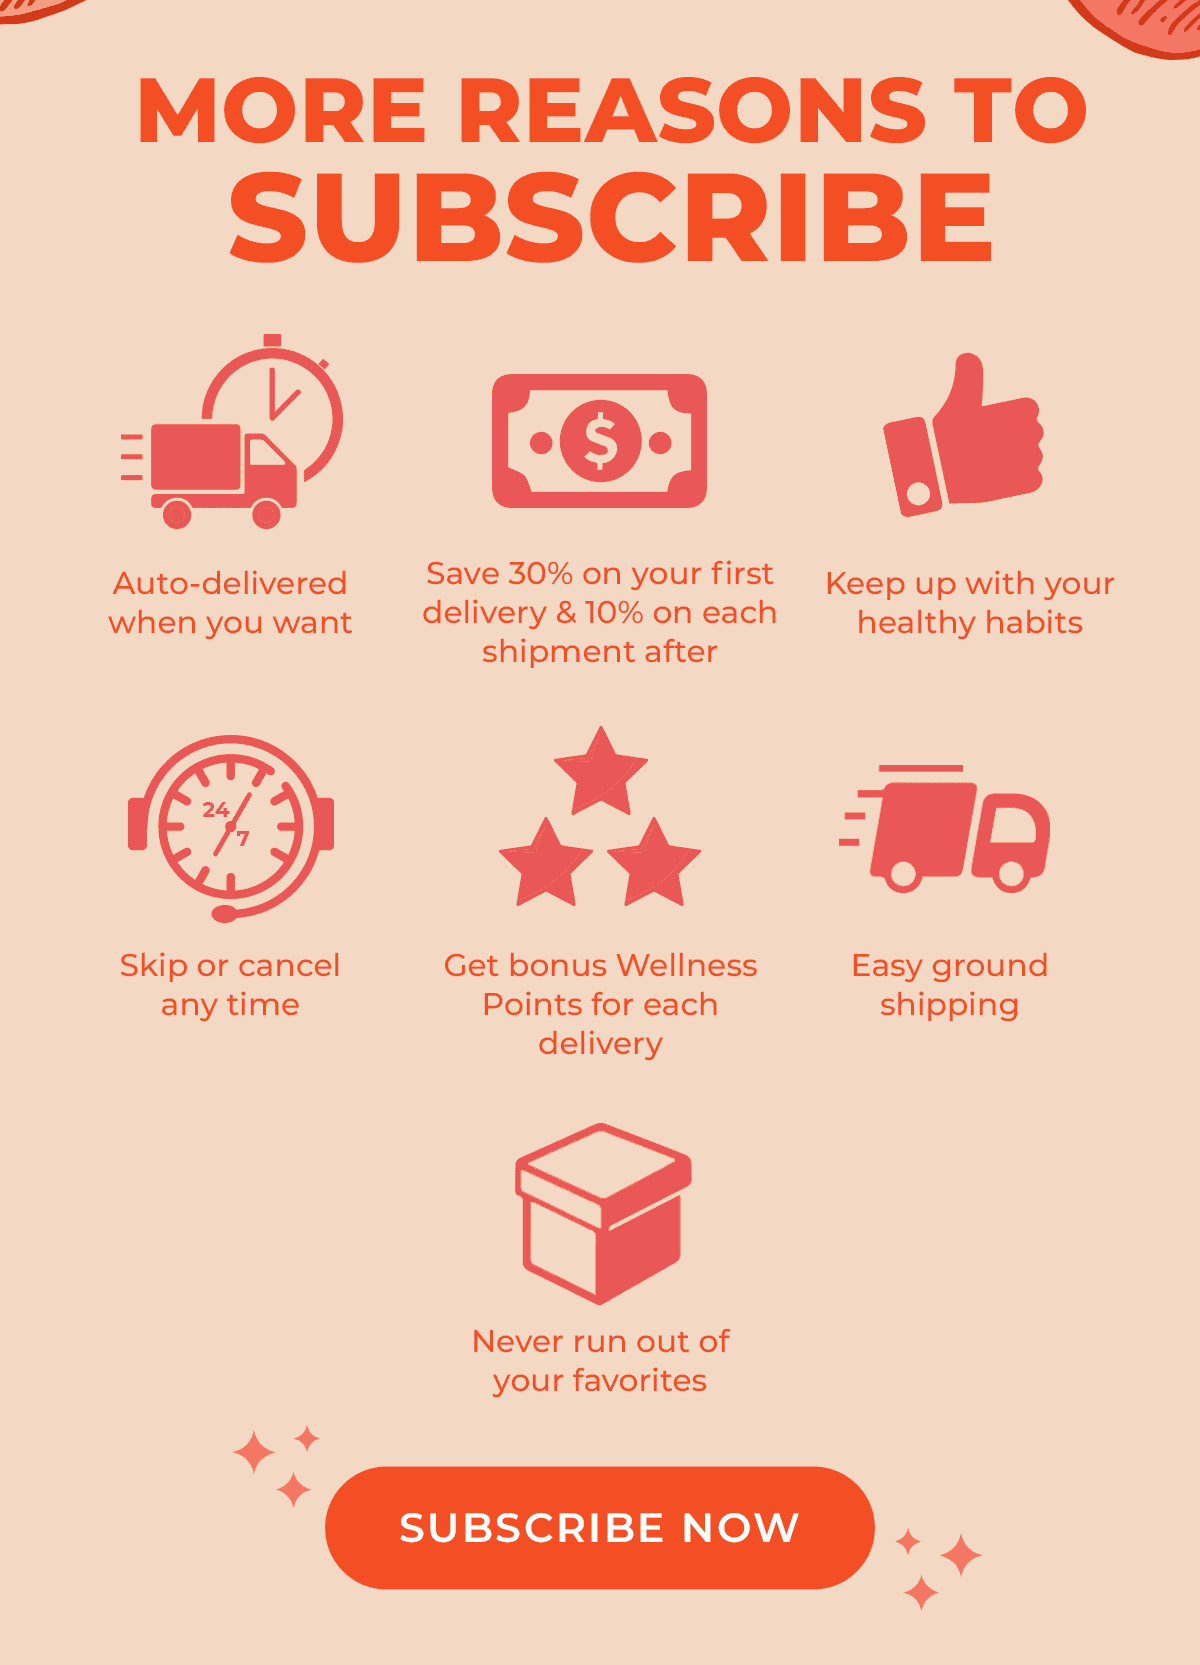 REASONS TO SUBSCRIBE